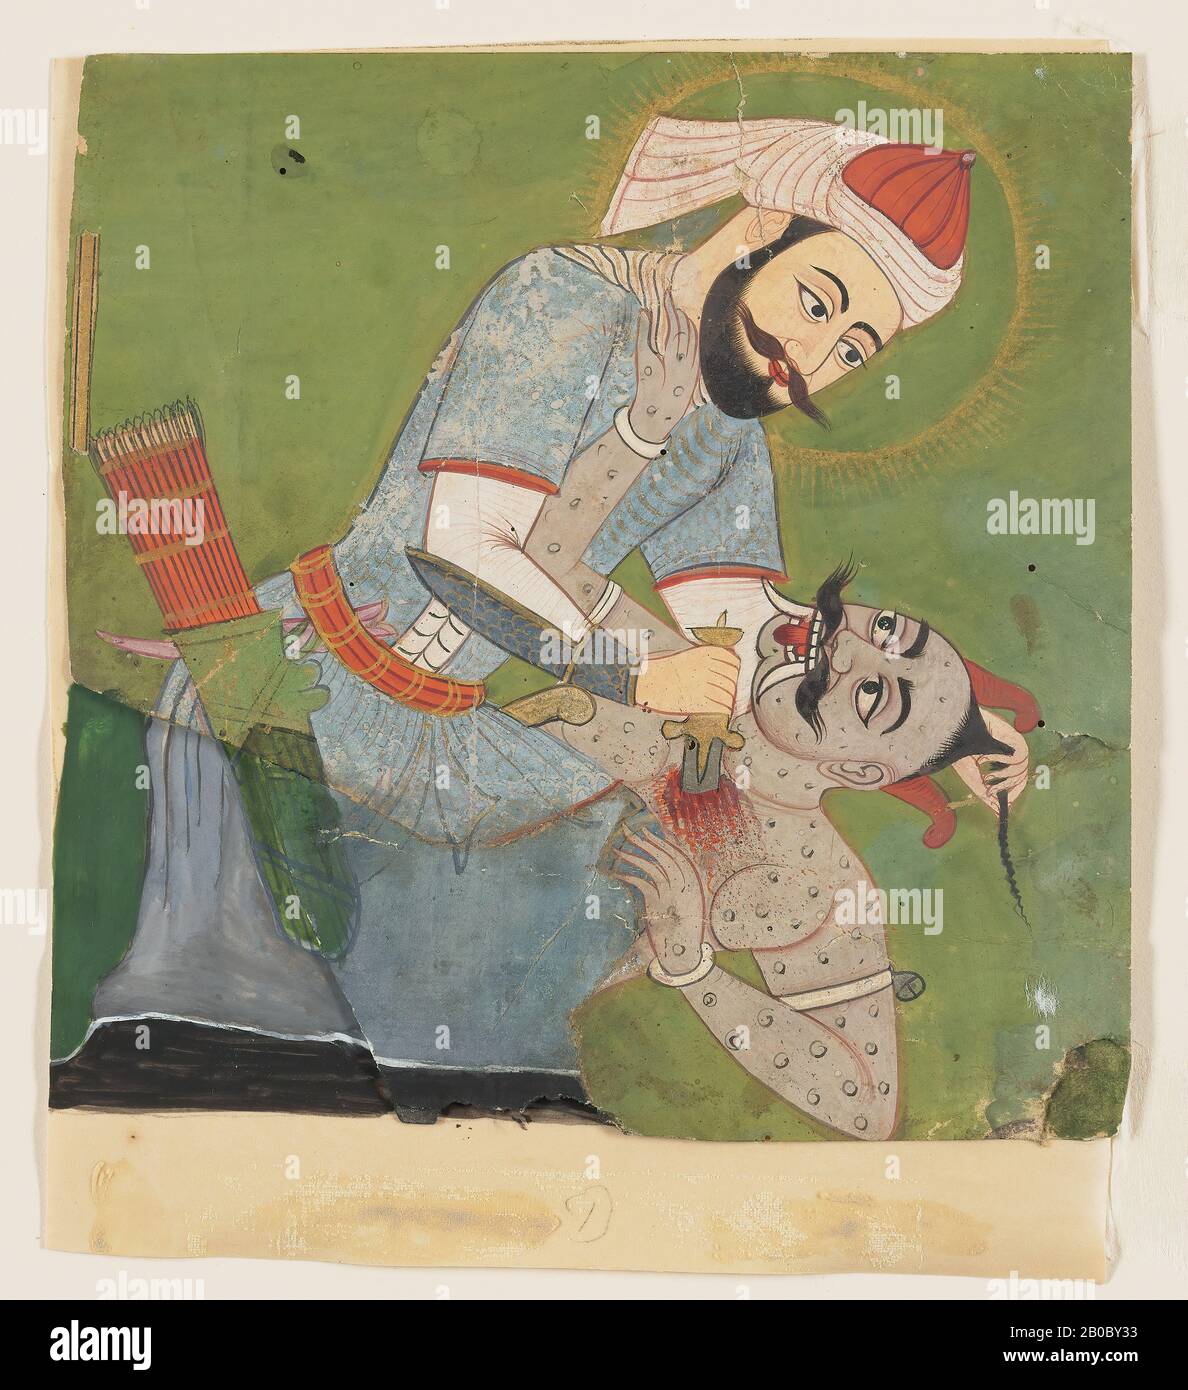 Unknown Artist (Persian), Rustam and Afrasiyab, 1600-1700, watercolor, gilding on paper, 6 1/8 in. x 6 1/16 in. (15.5 cm. x 15.4 cm.) Stock Photo